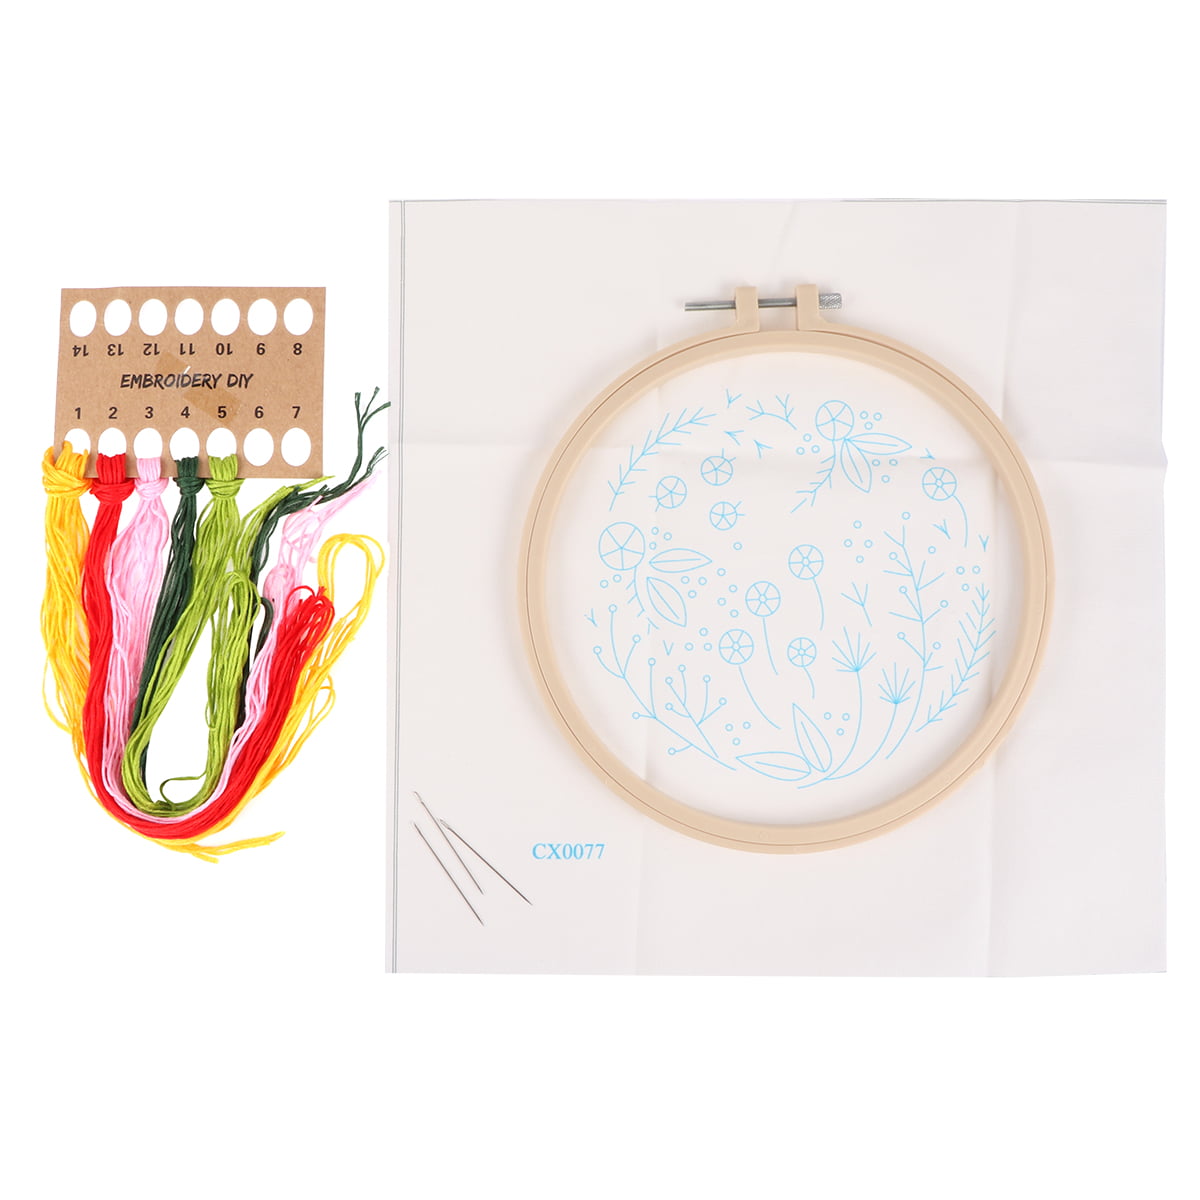 EEEkit 4 Sets Embroidery Starter Kit for Beginners Cross Stitch Stamped DIY Decor Craft